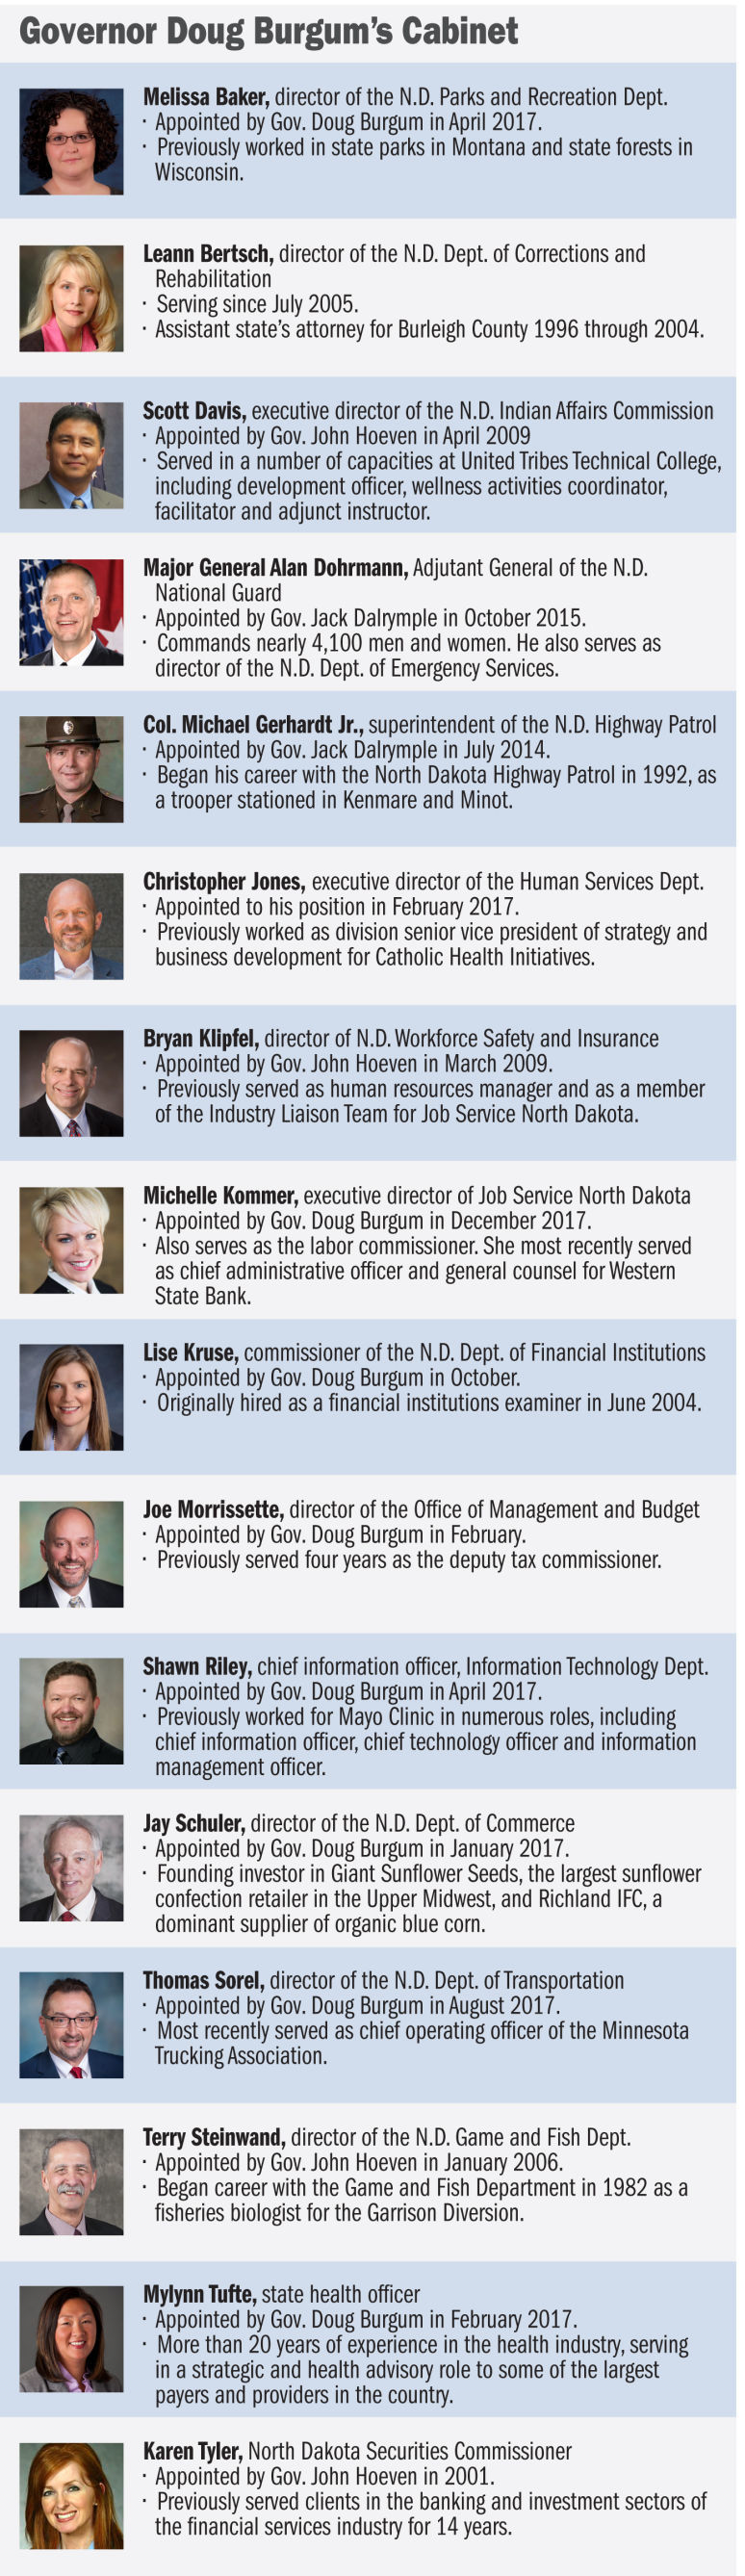 Burgum S Cabinet Features Leaders With Private Sector Experience